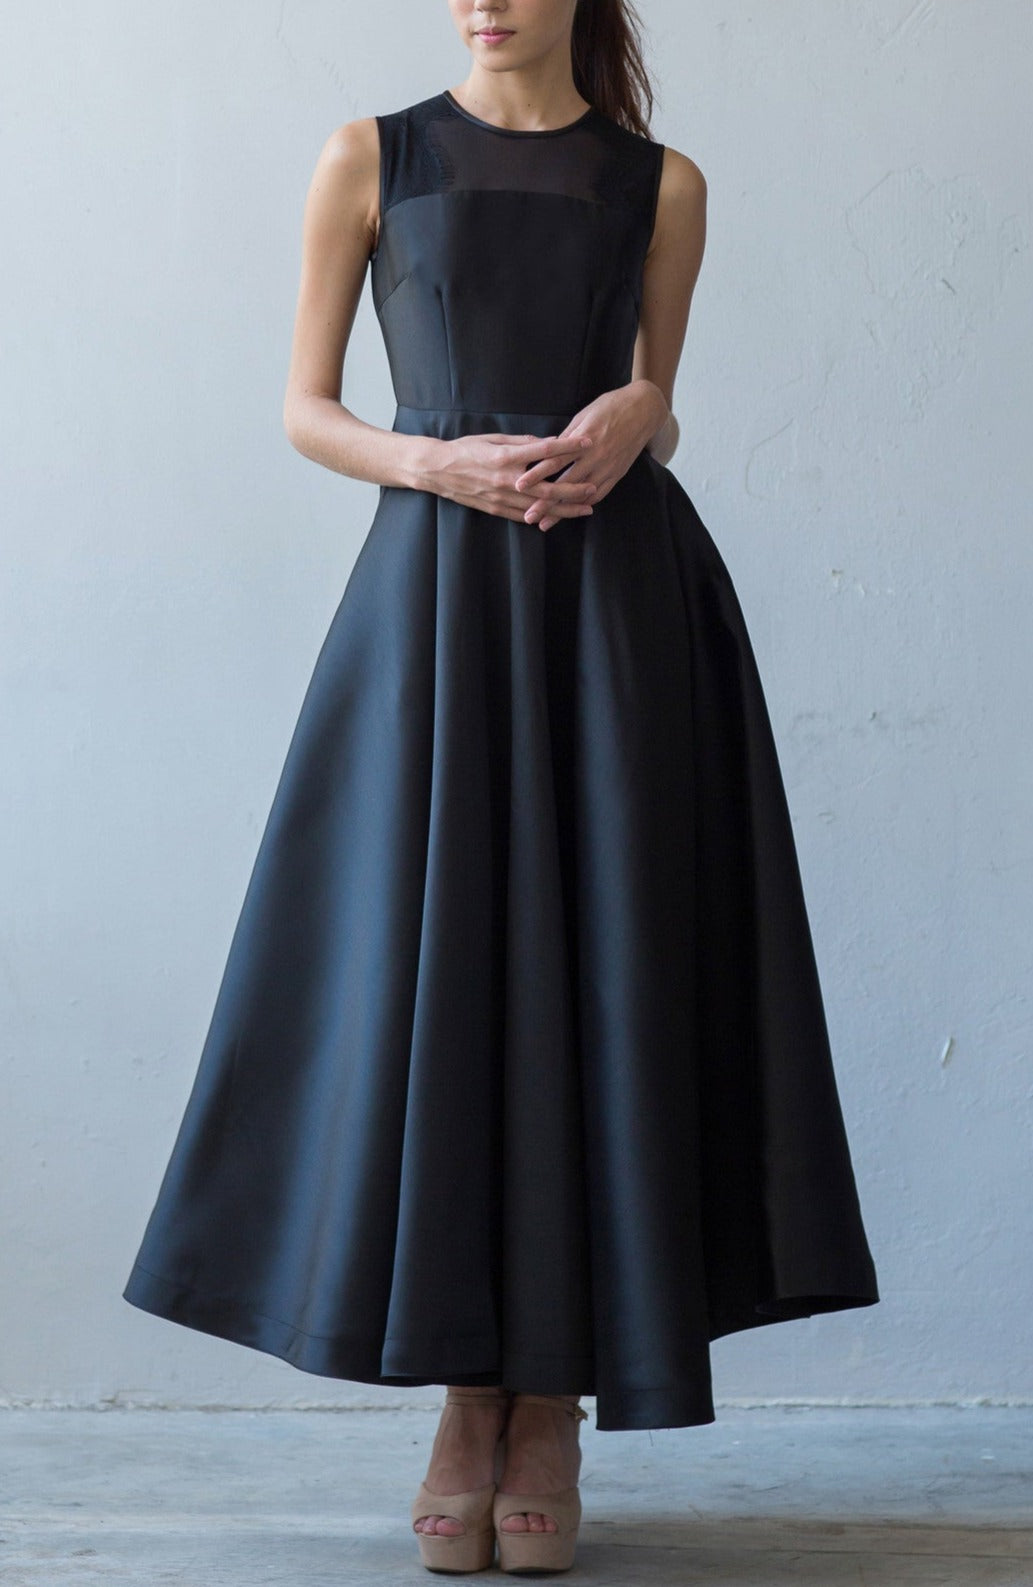 Mila A-line gown in black